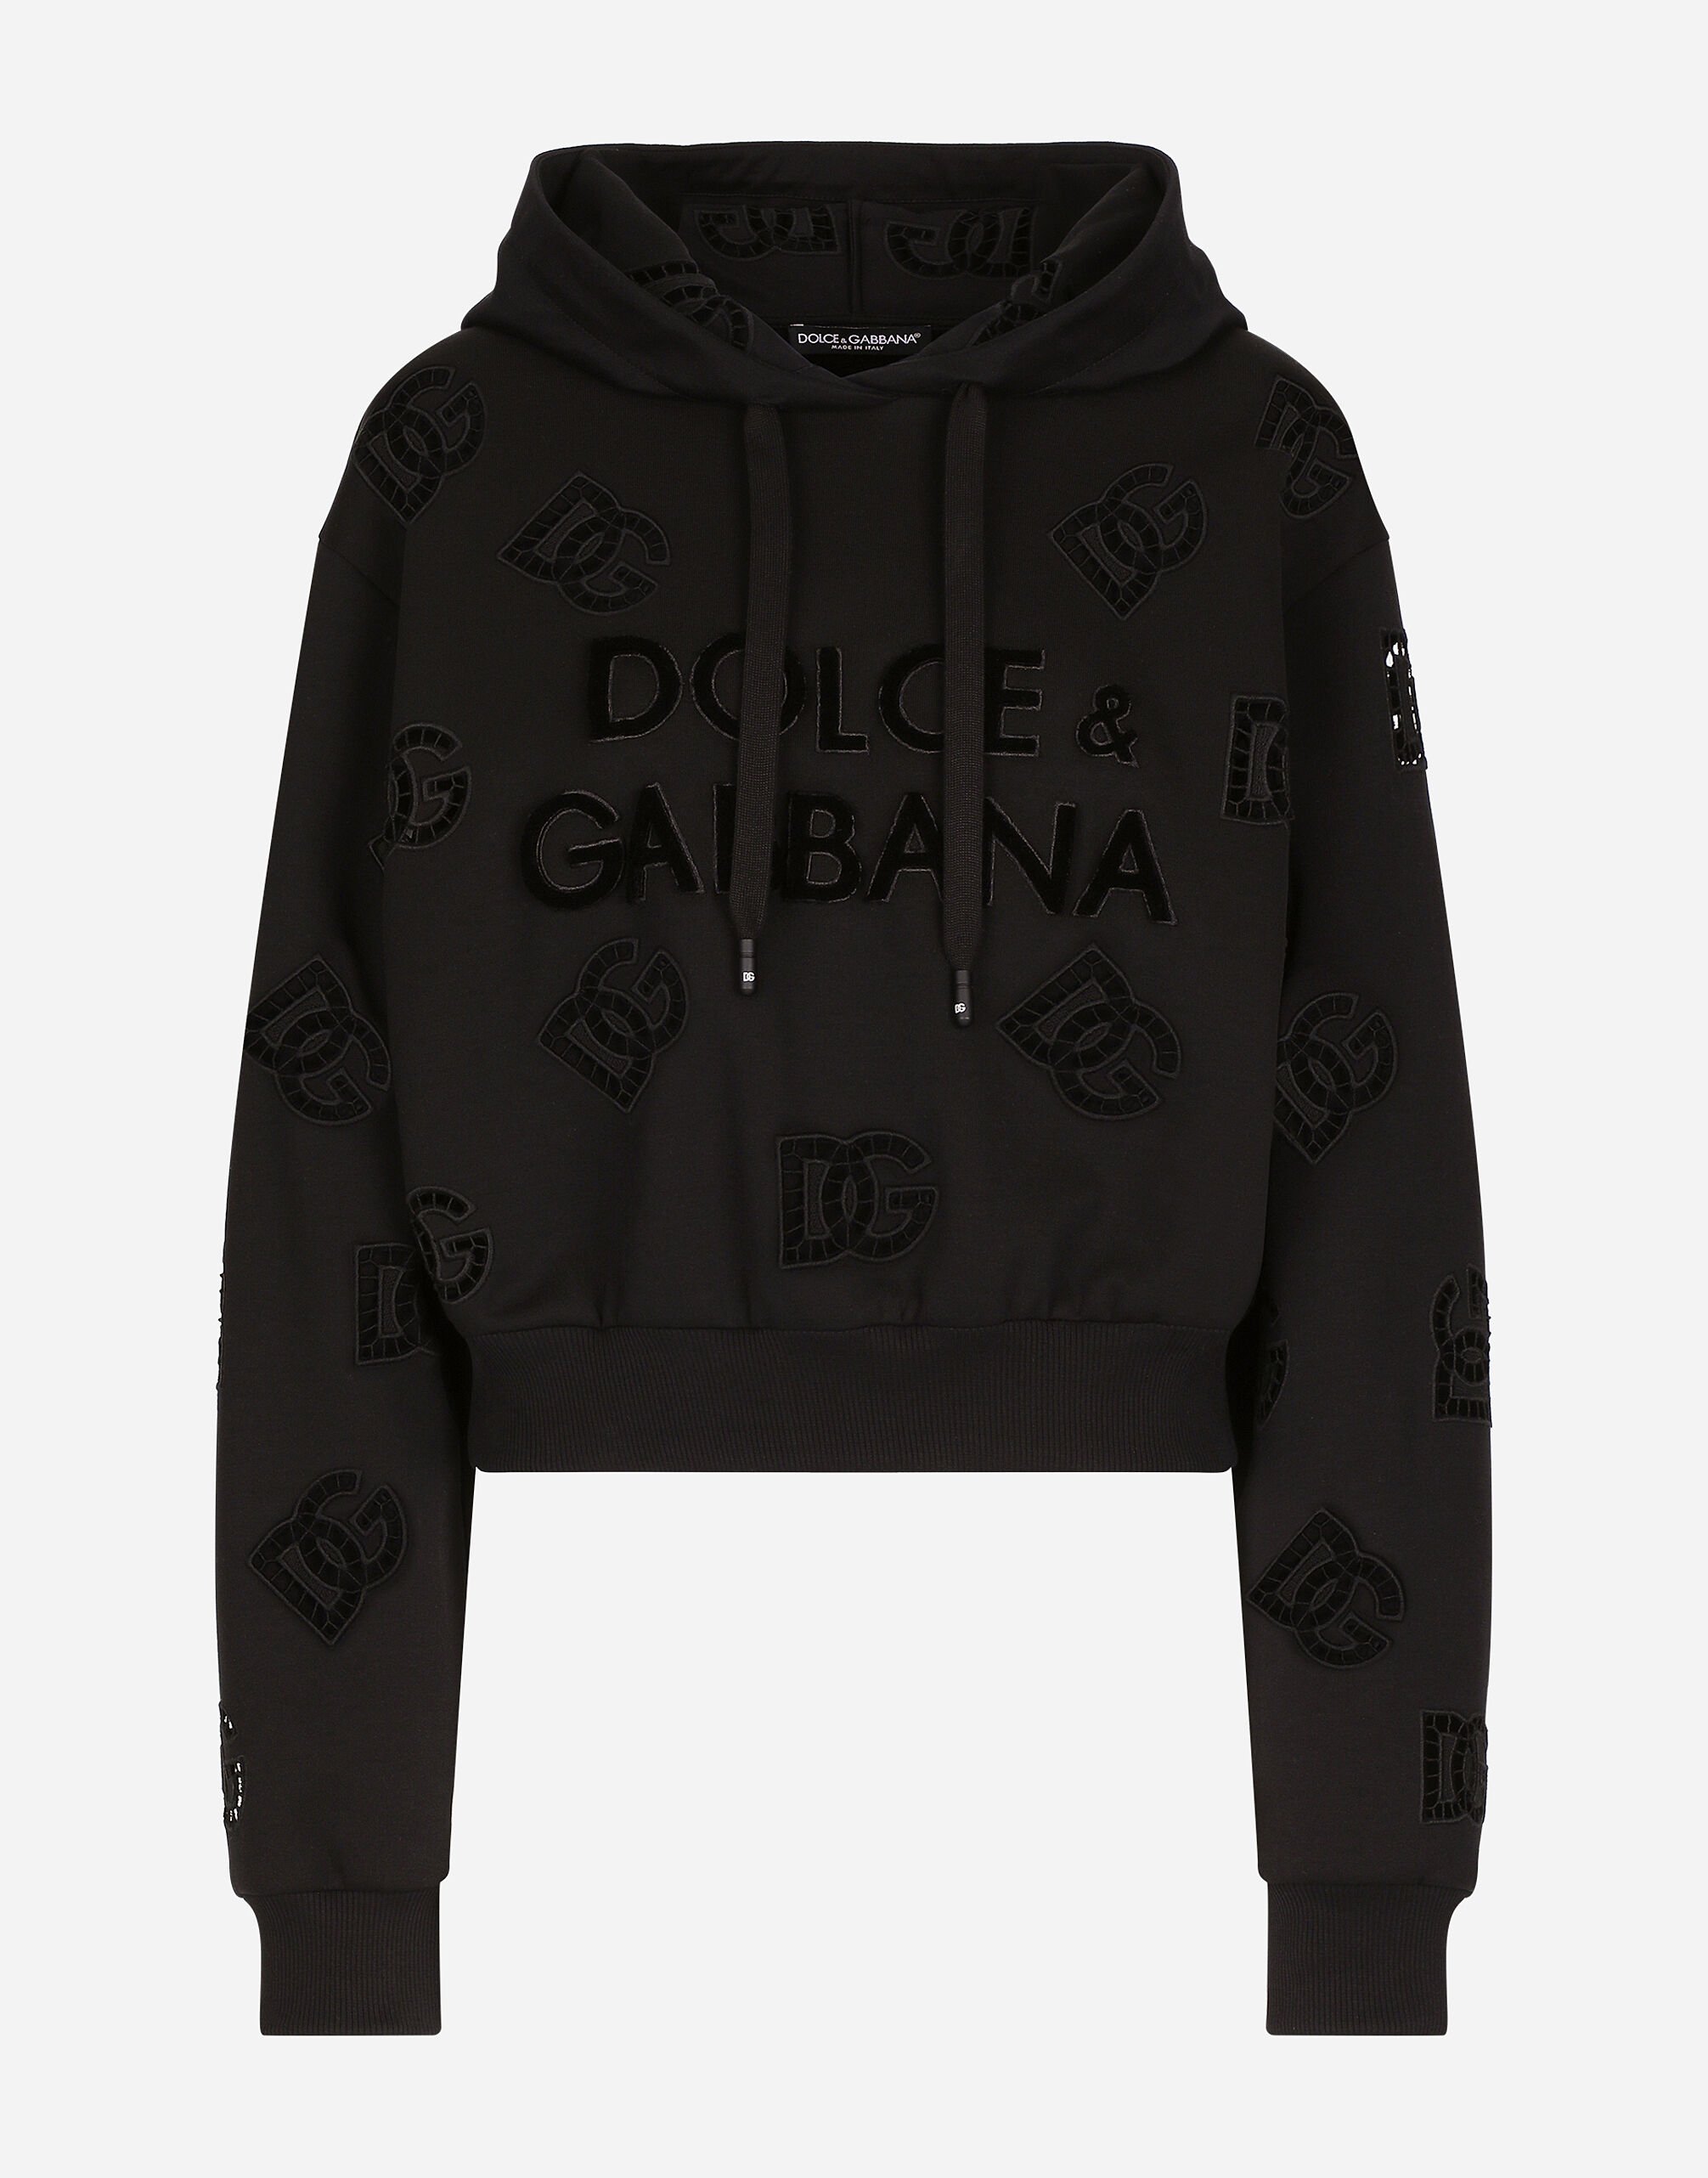 Dolce & Gabbana Jersey hoodie with cut-out and DG logo Black FXE03TJBMQ3